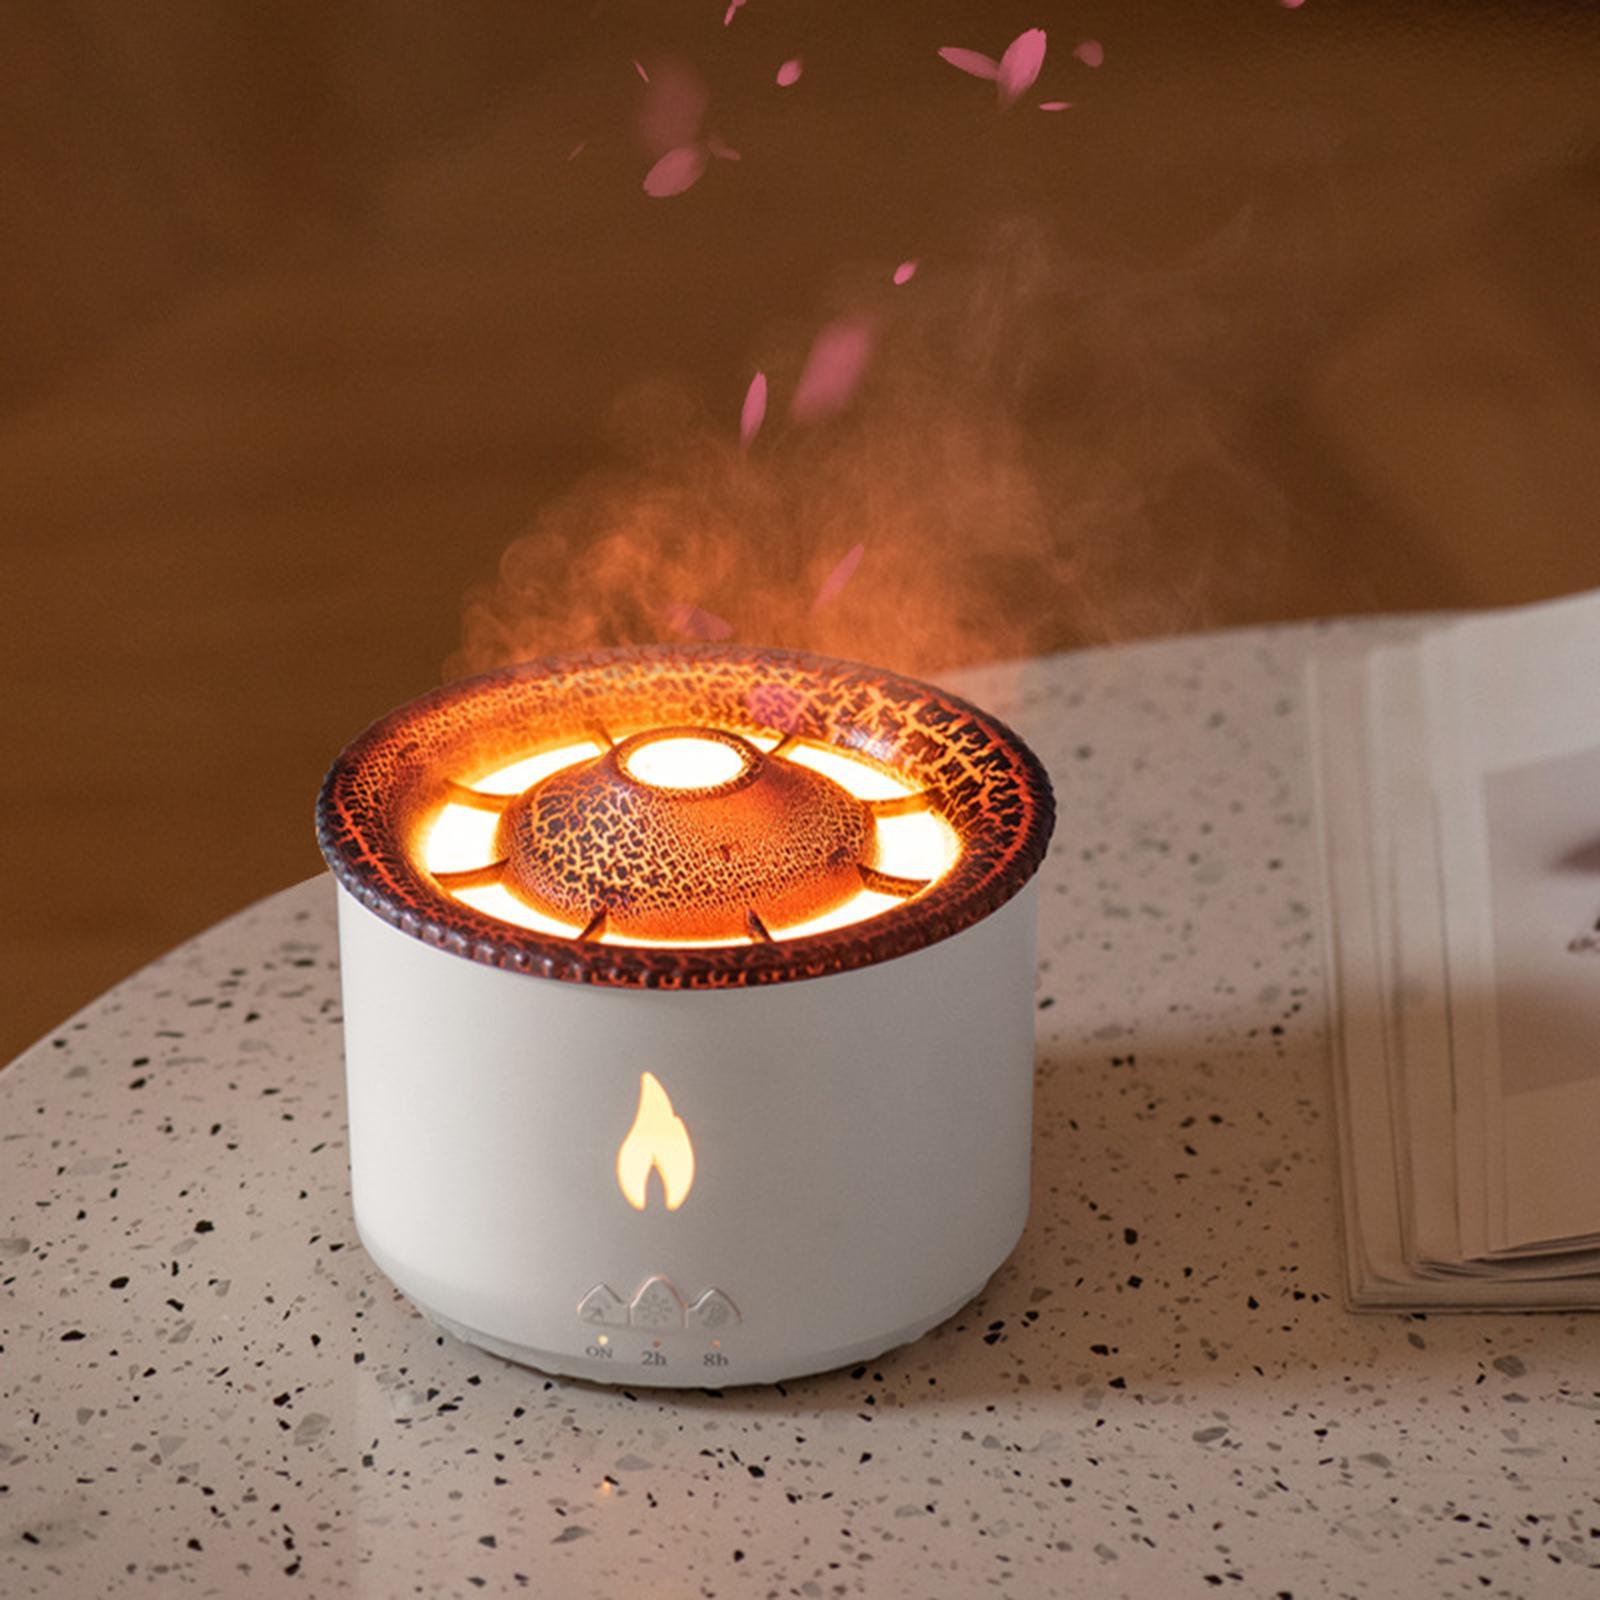 Essential Oil Flame Diffuser Air Humidifier LED Night Light for Travel